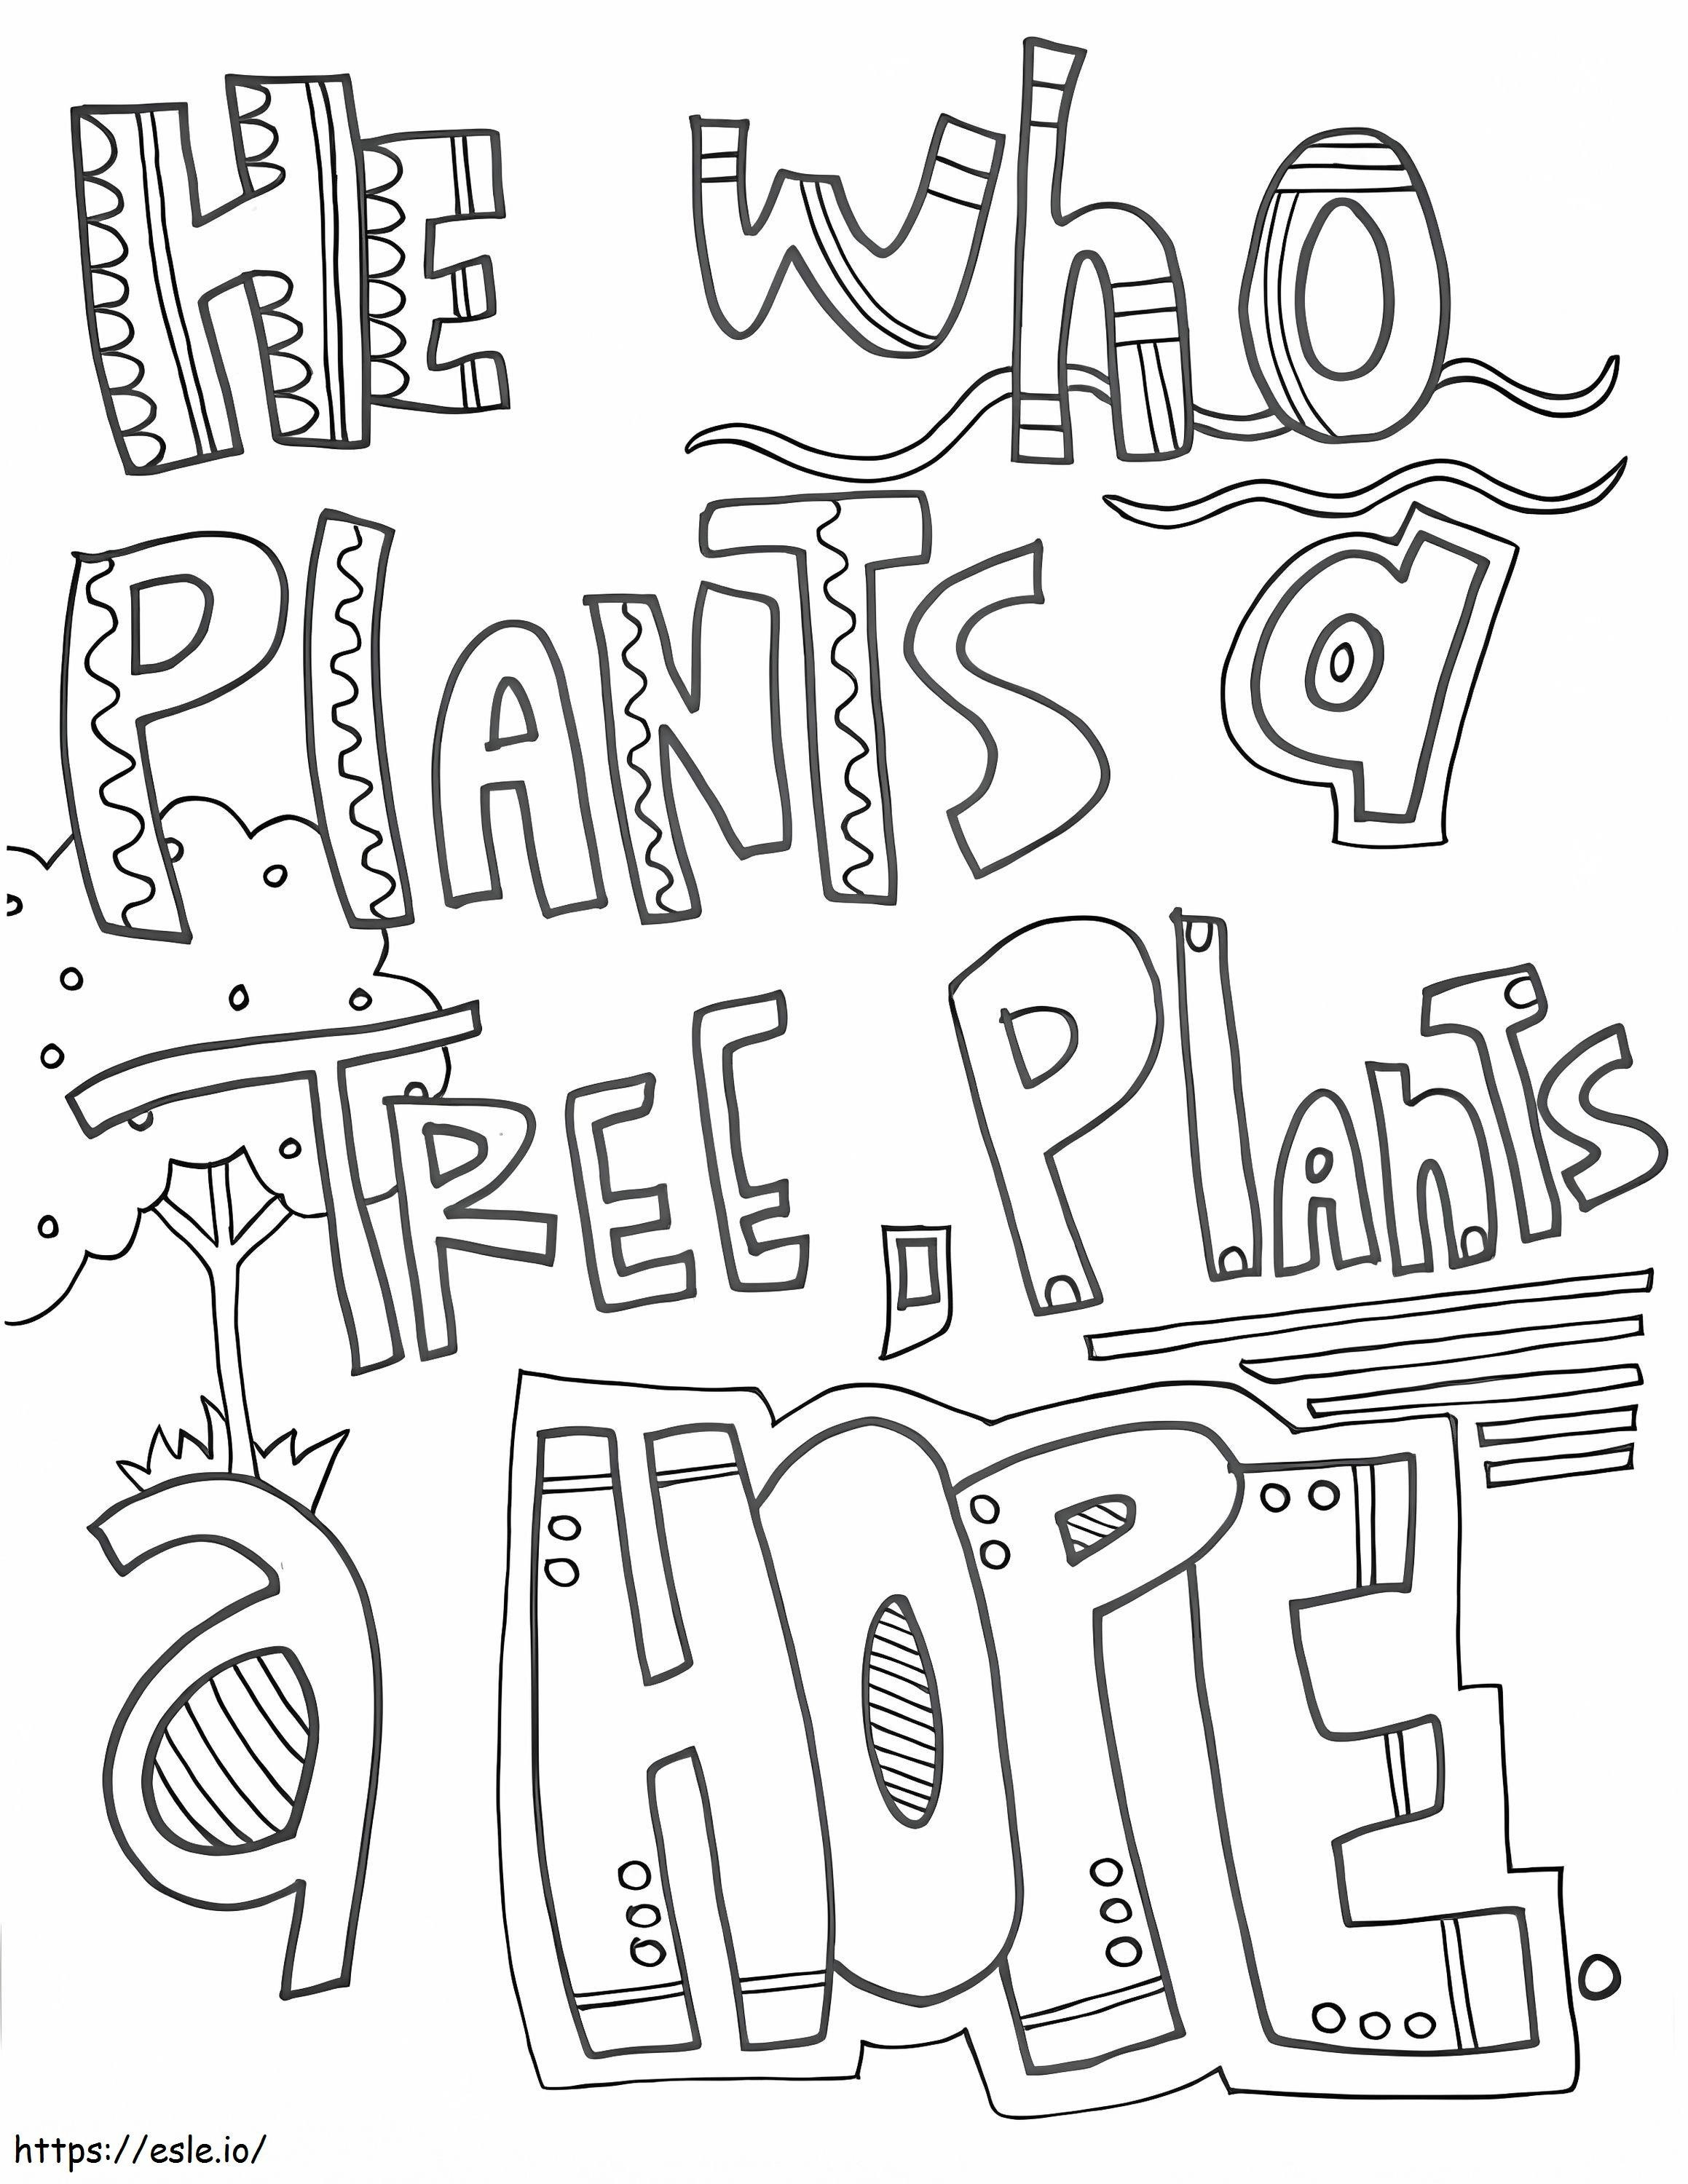 Arbor Day 5 coloring page